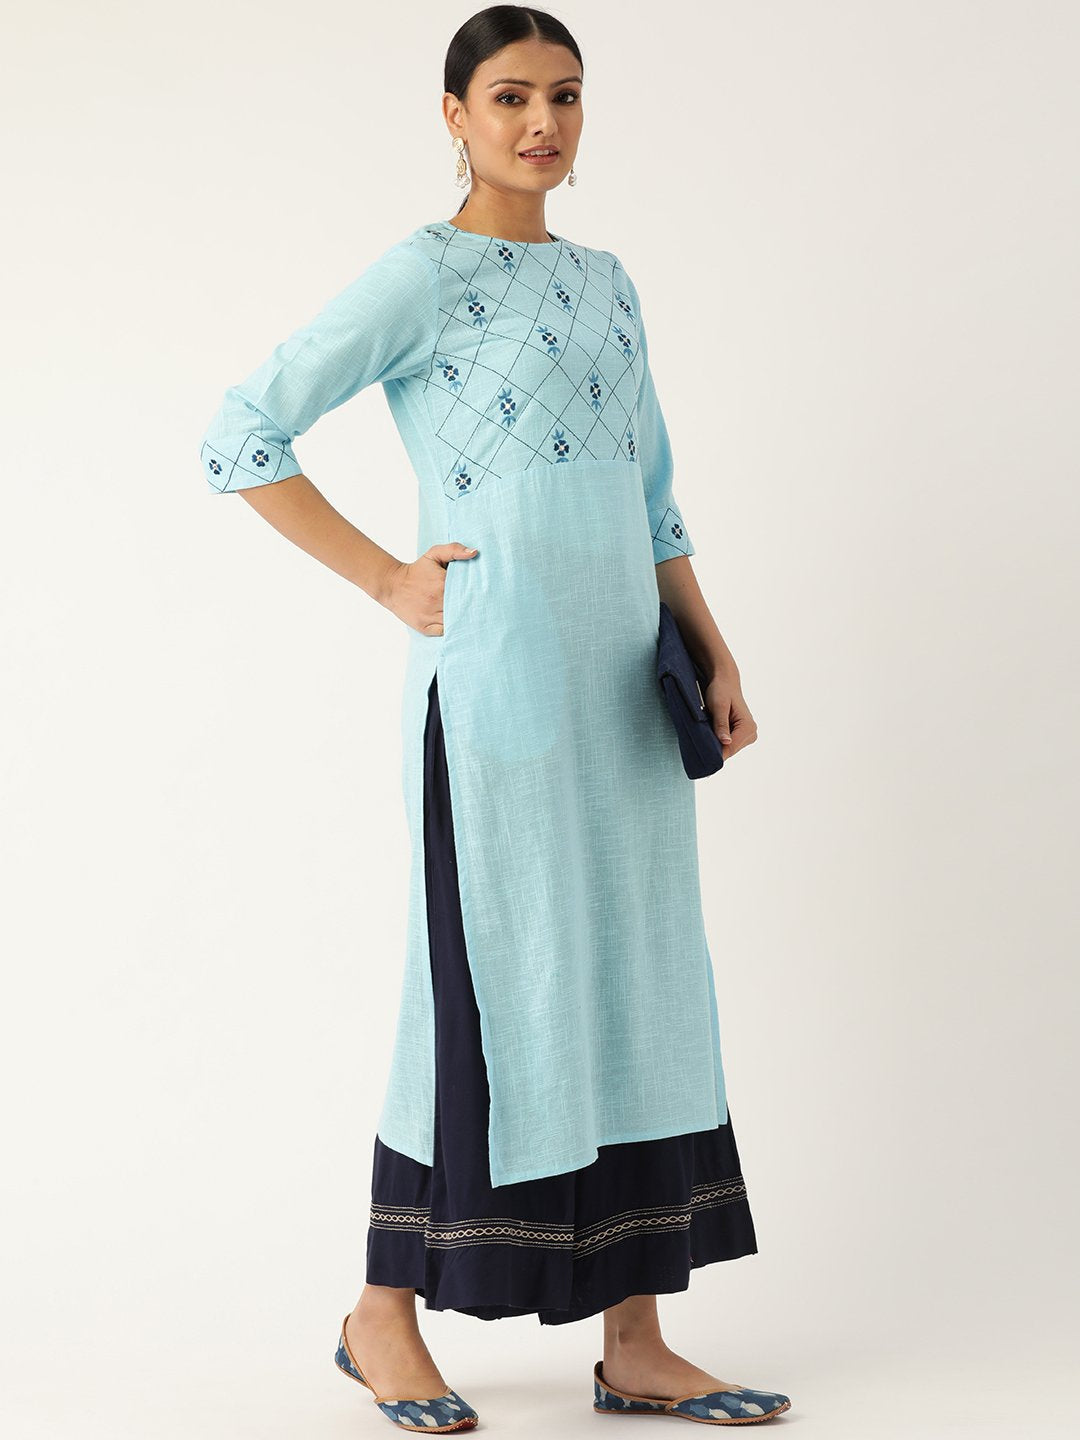 Women's Blue Calf Length Three-Quarter Sleeves Straight Solid Embroidered Cotton Kurta - Nayo Clothing